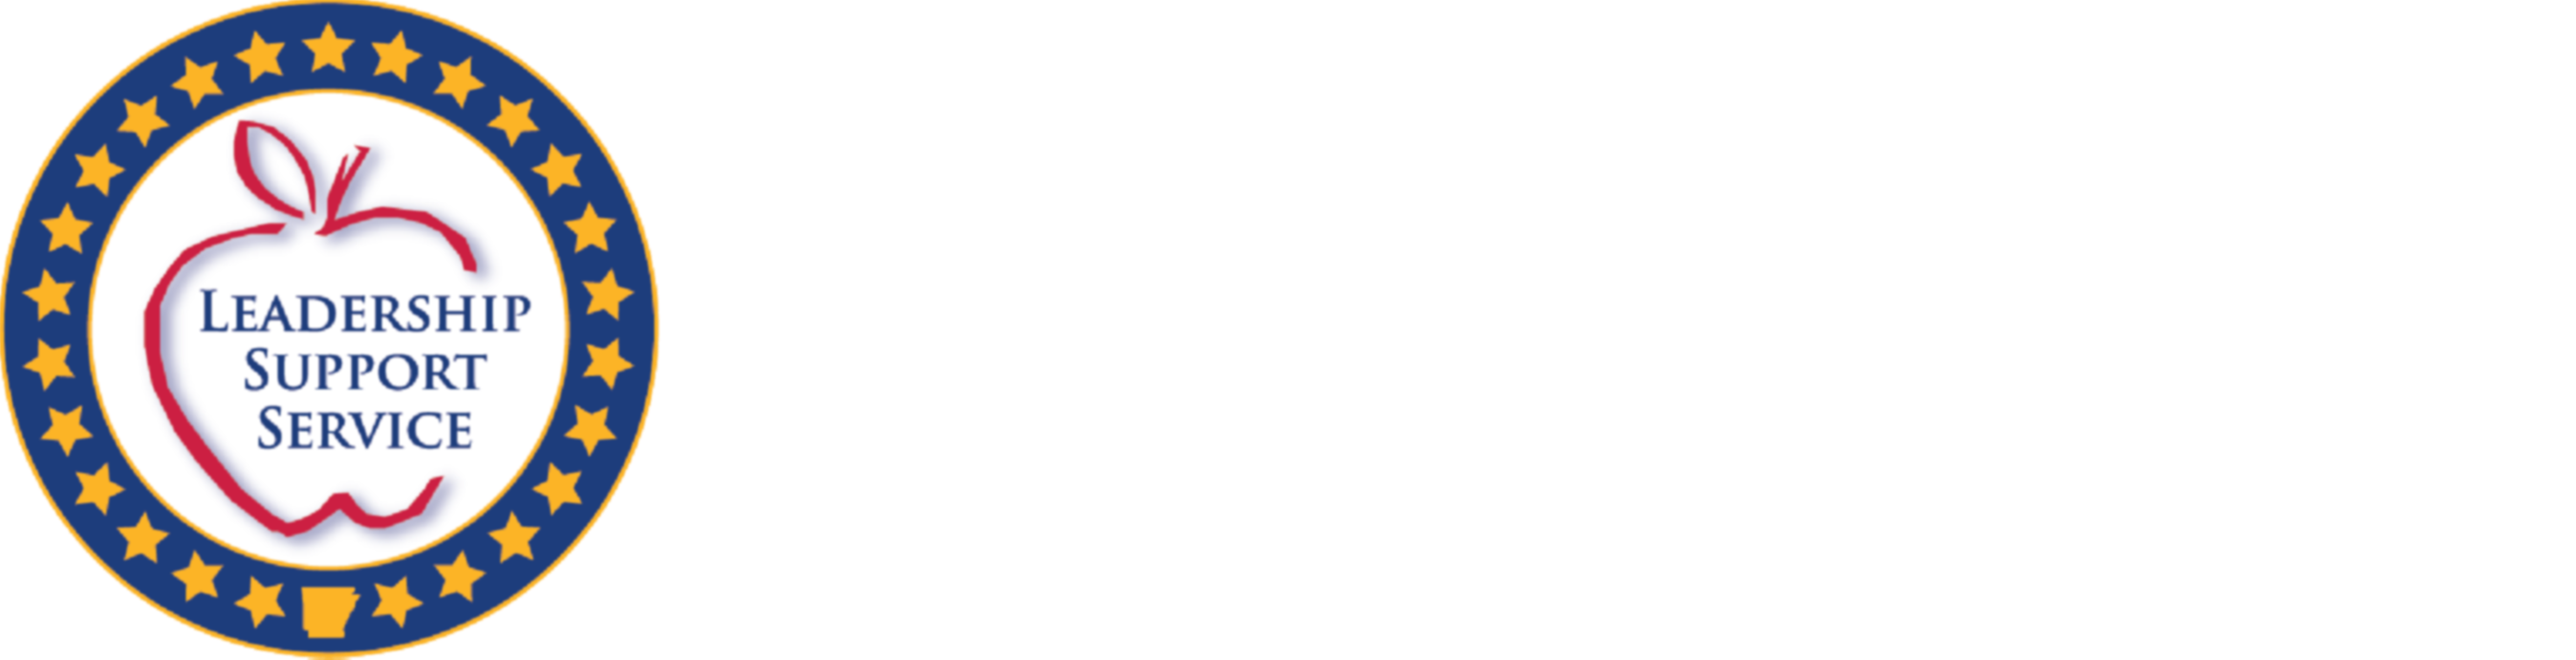 State required info